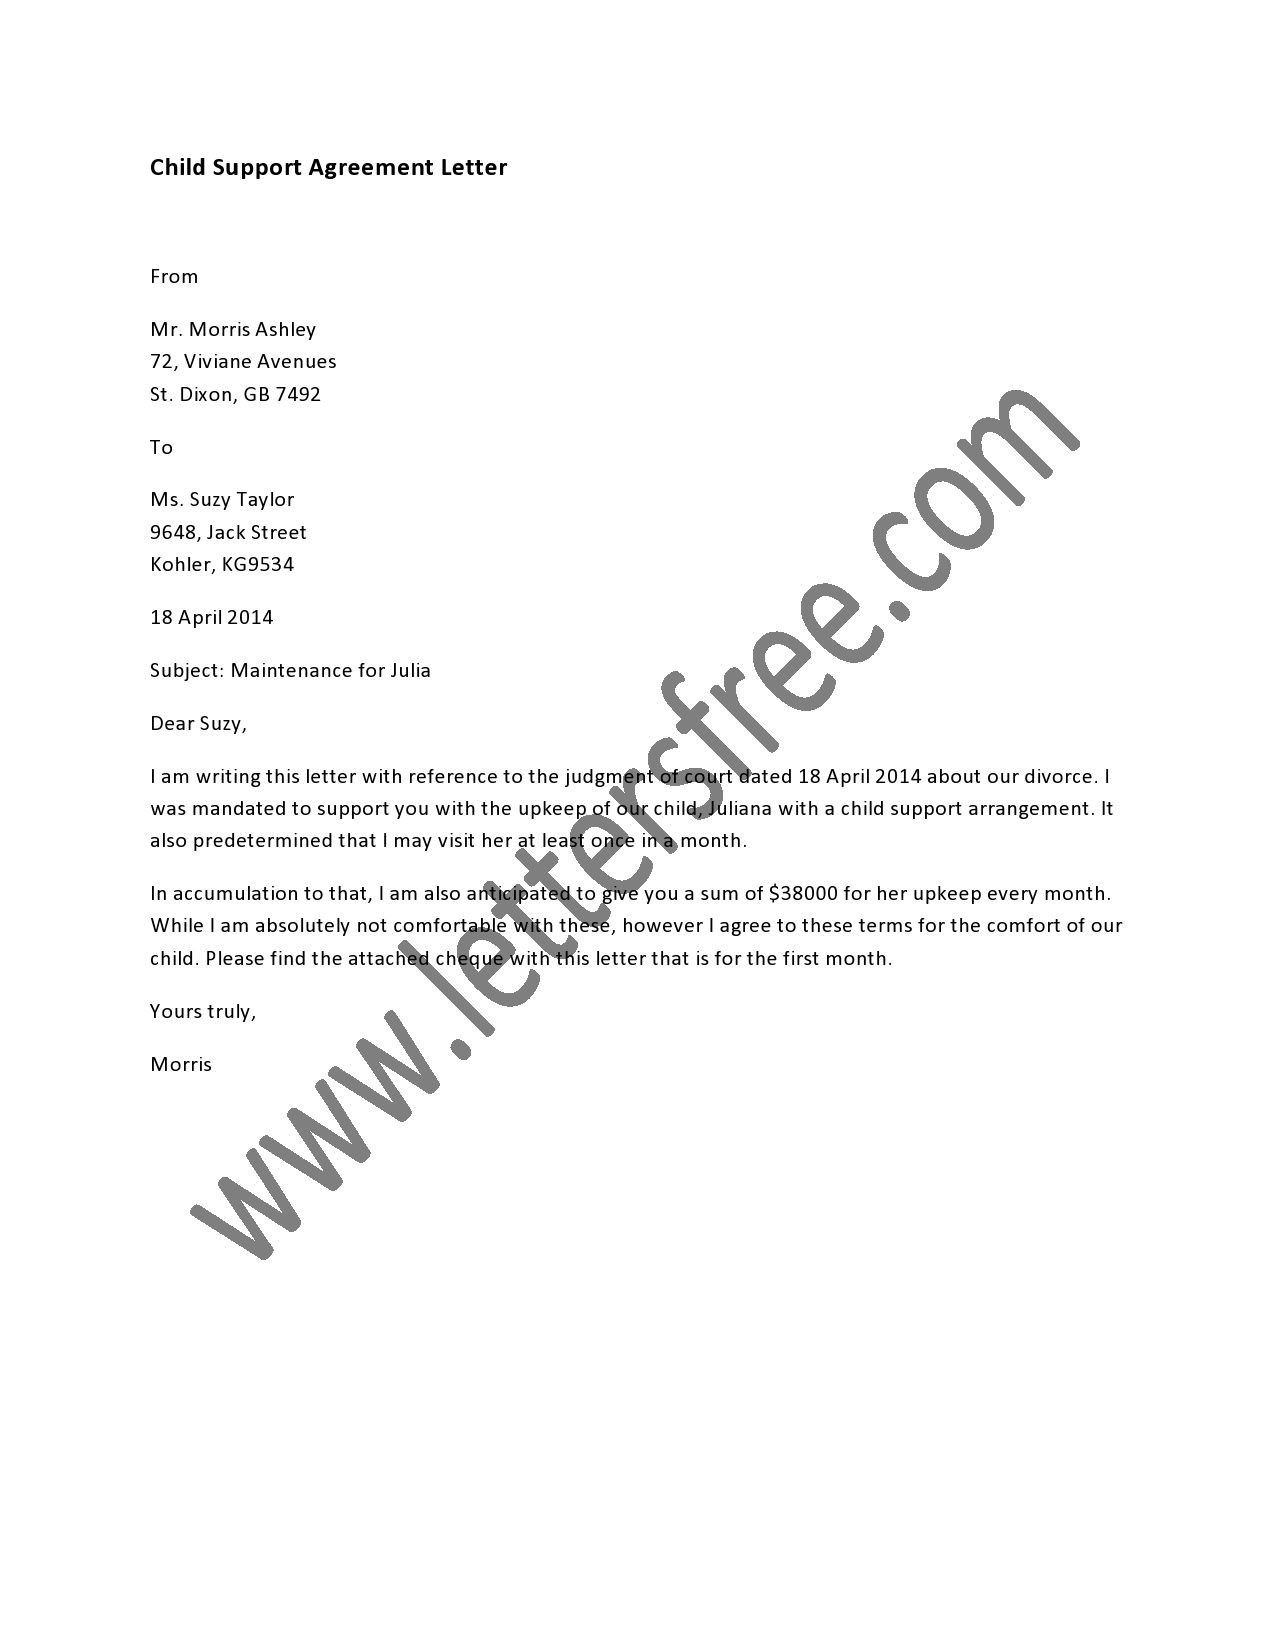 Child Support Agreement Letter Sample Letters Document Between